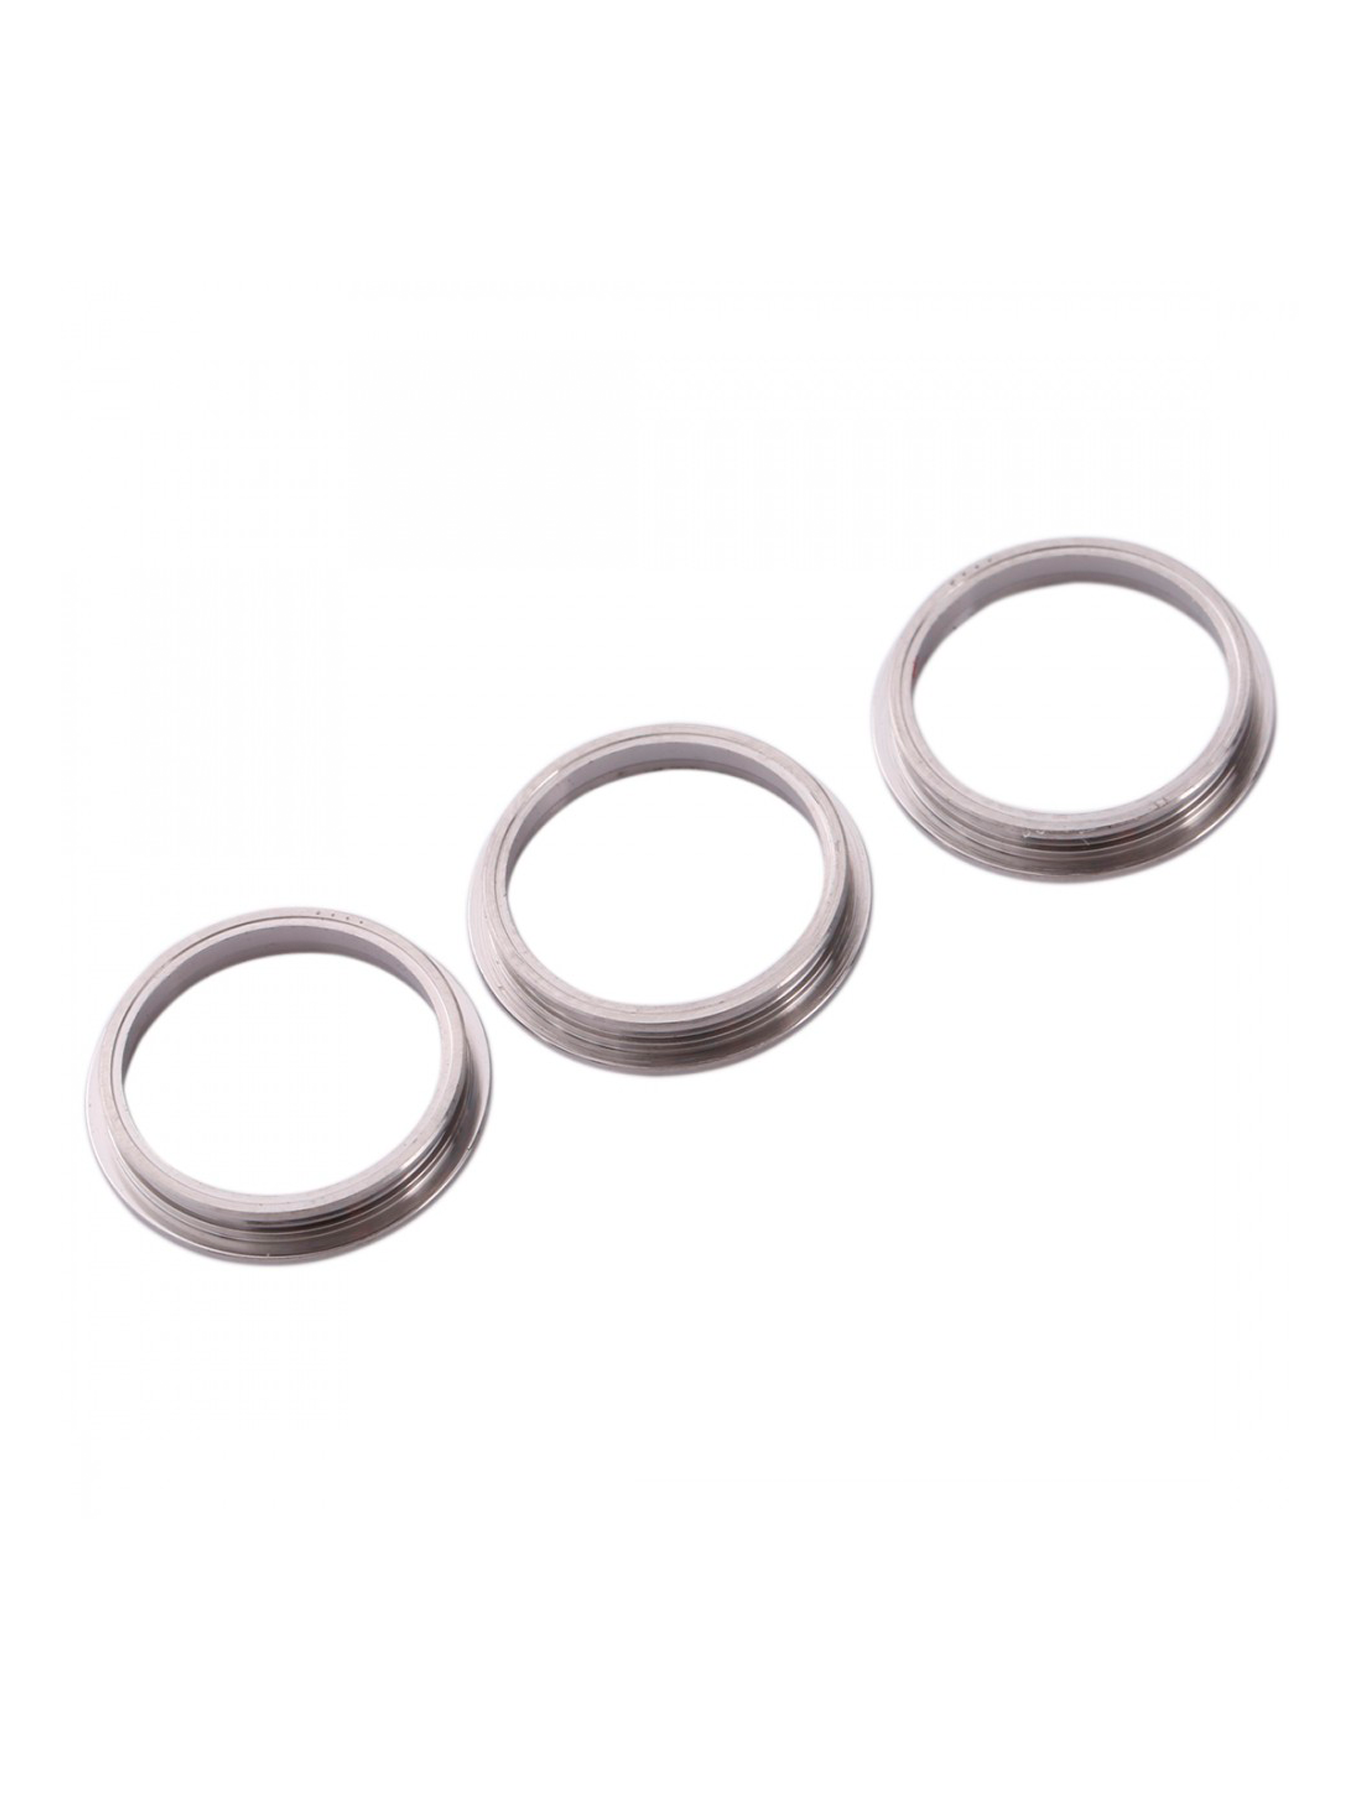 SILVER - BACK CAMERA BEZEL RING ONLY (3 PIECE SET) FOR IPHONE 12 PRO  (10 PACK)